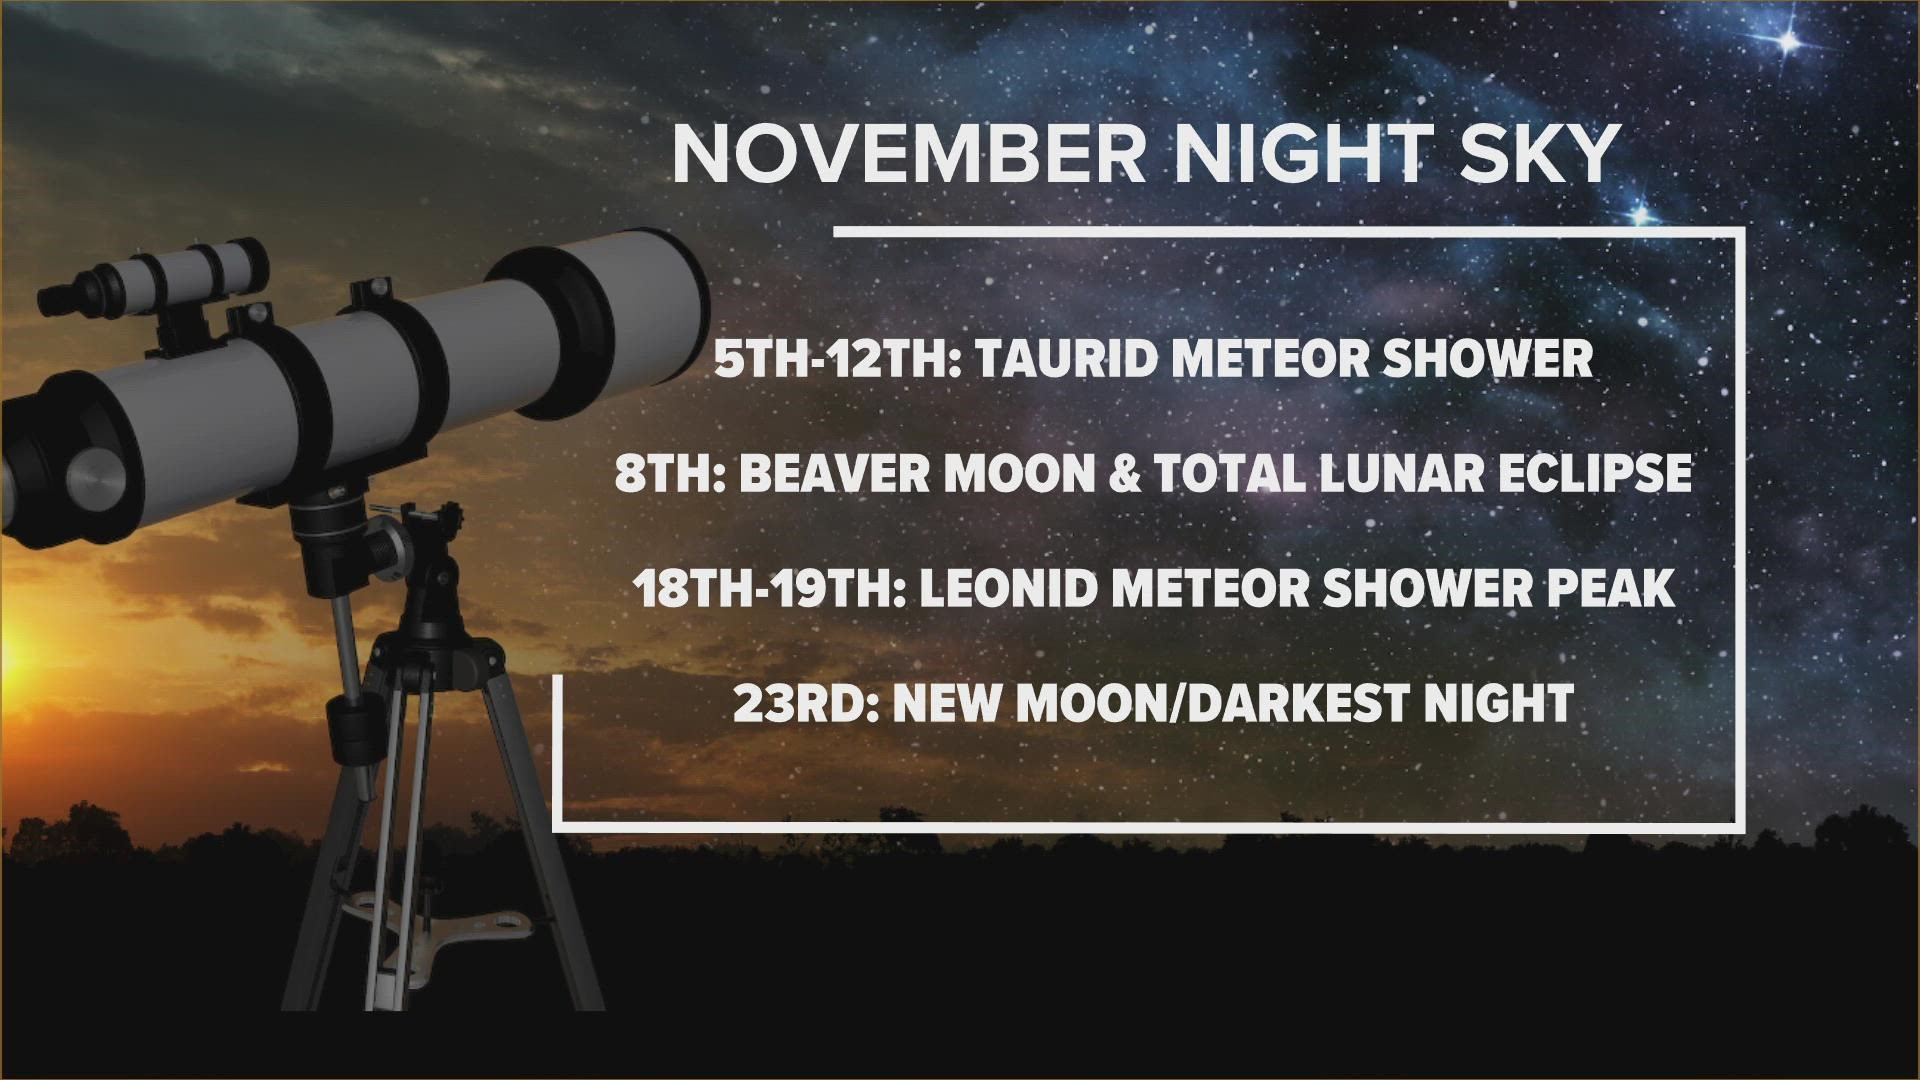 Here are the astronomy events you can see in the night sky this